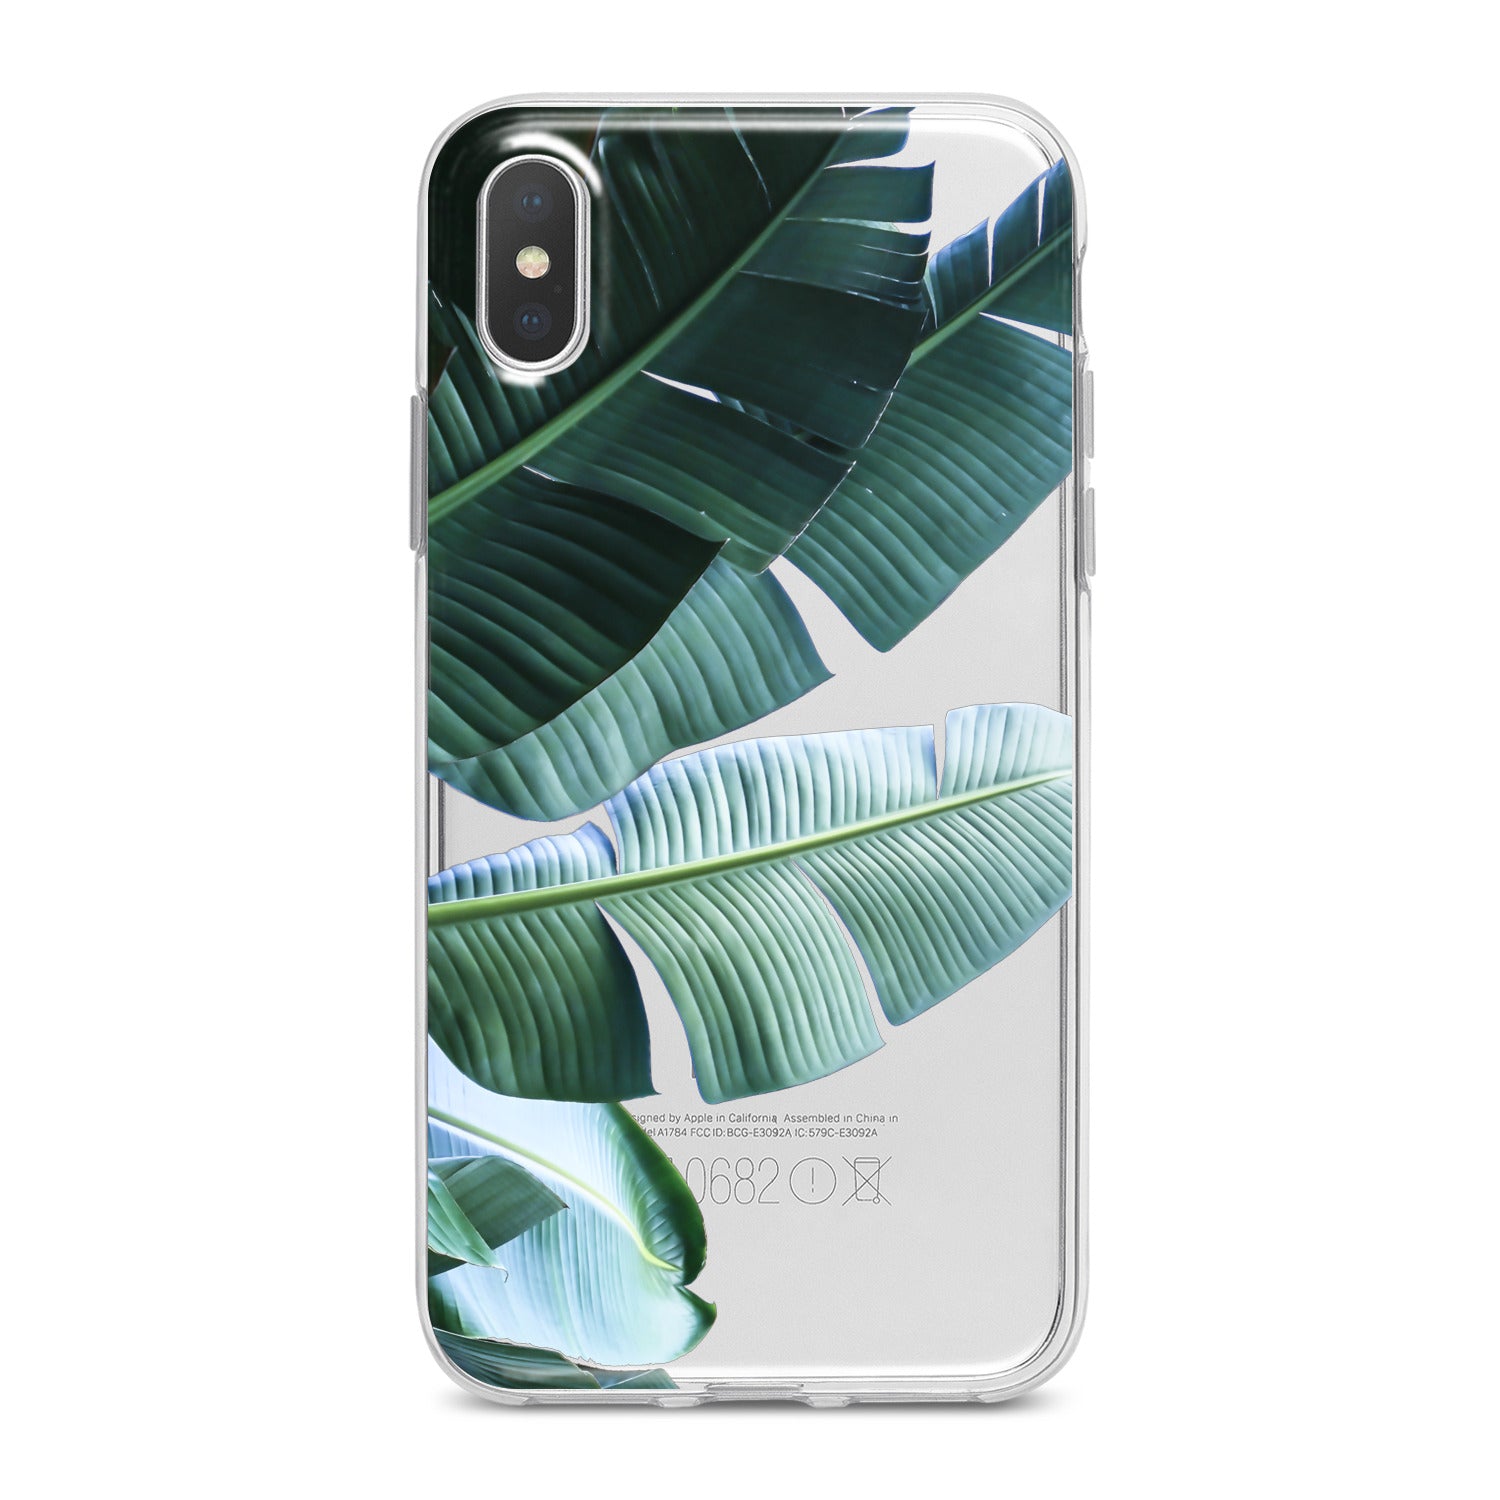 Lex Altern Green Tropical Leaves Phone Case for your iPhone & Android phone.